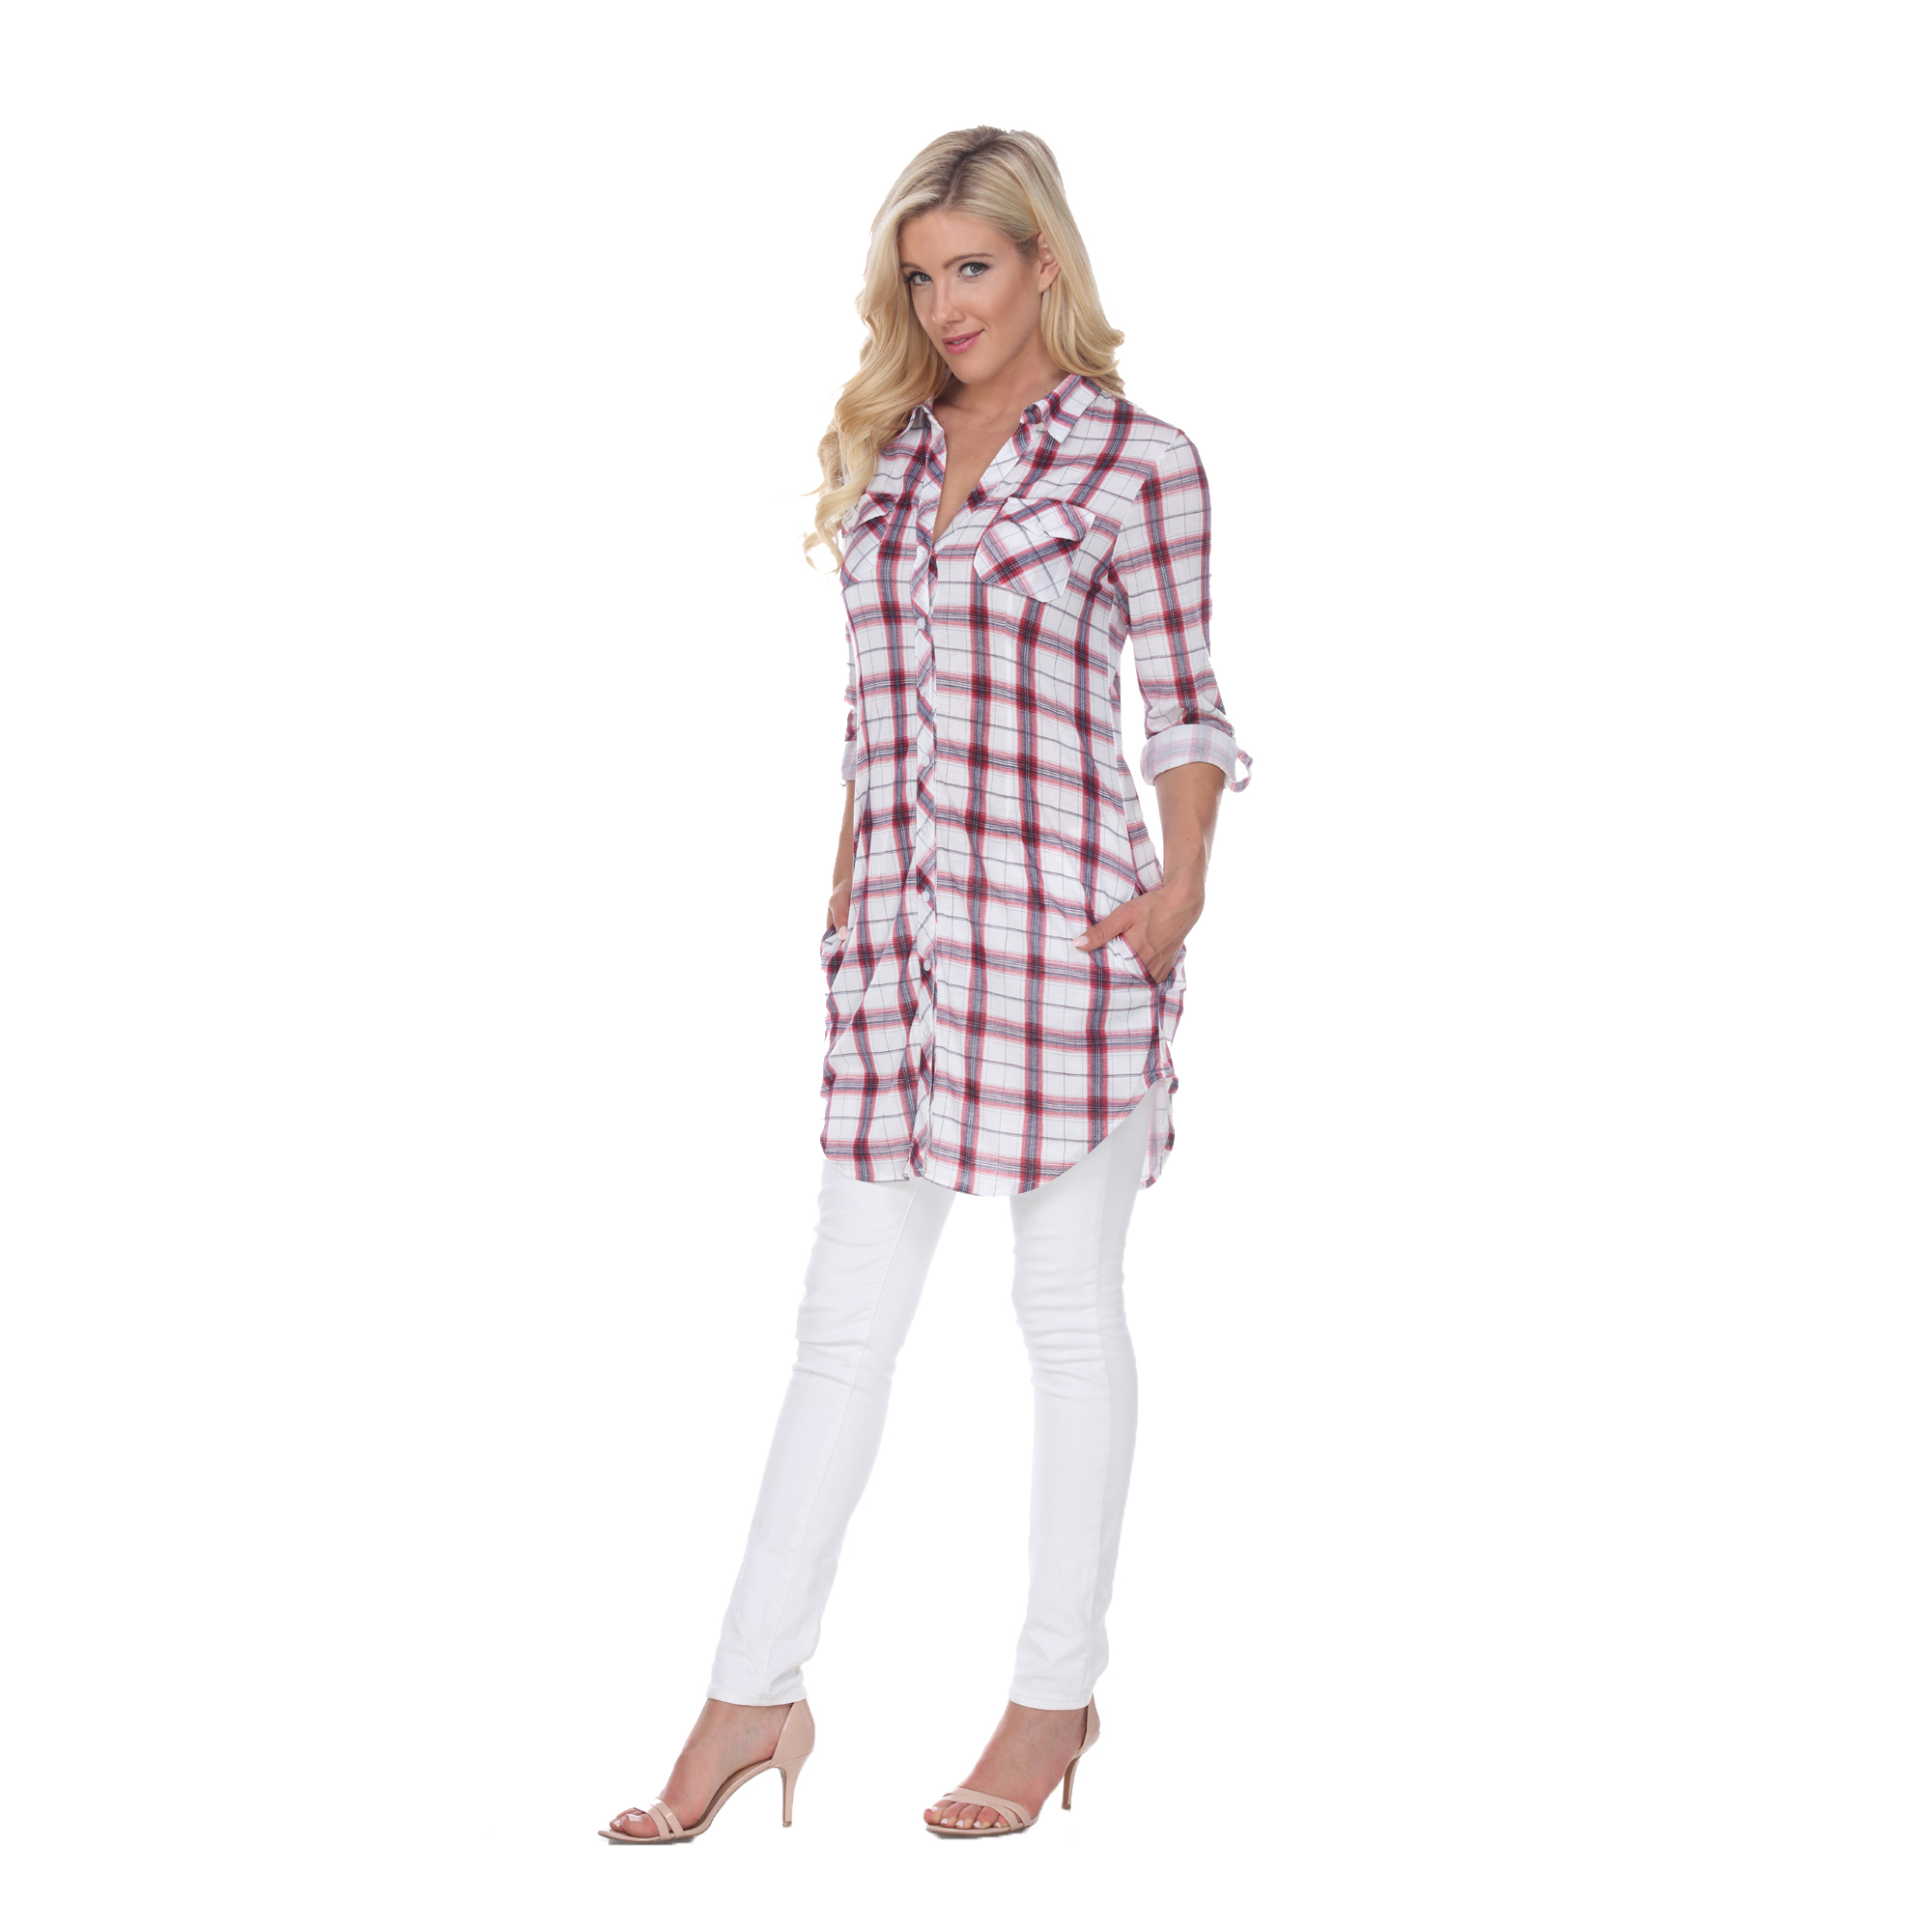 White Mark Women's Stretchy Plaid Flannel Tunic Top - Red/White, X-Large